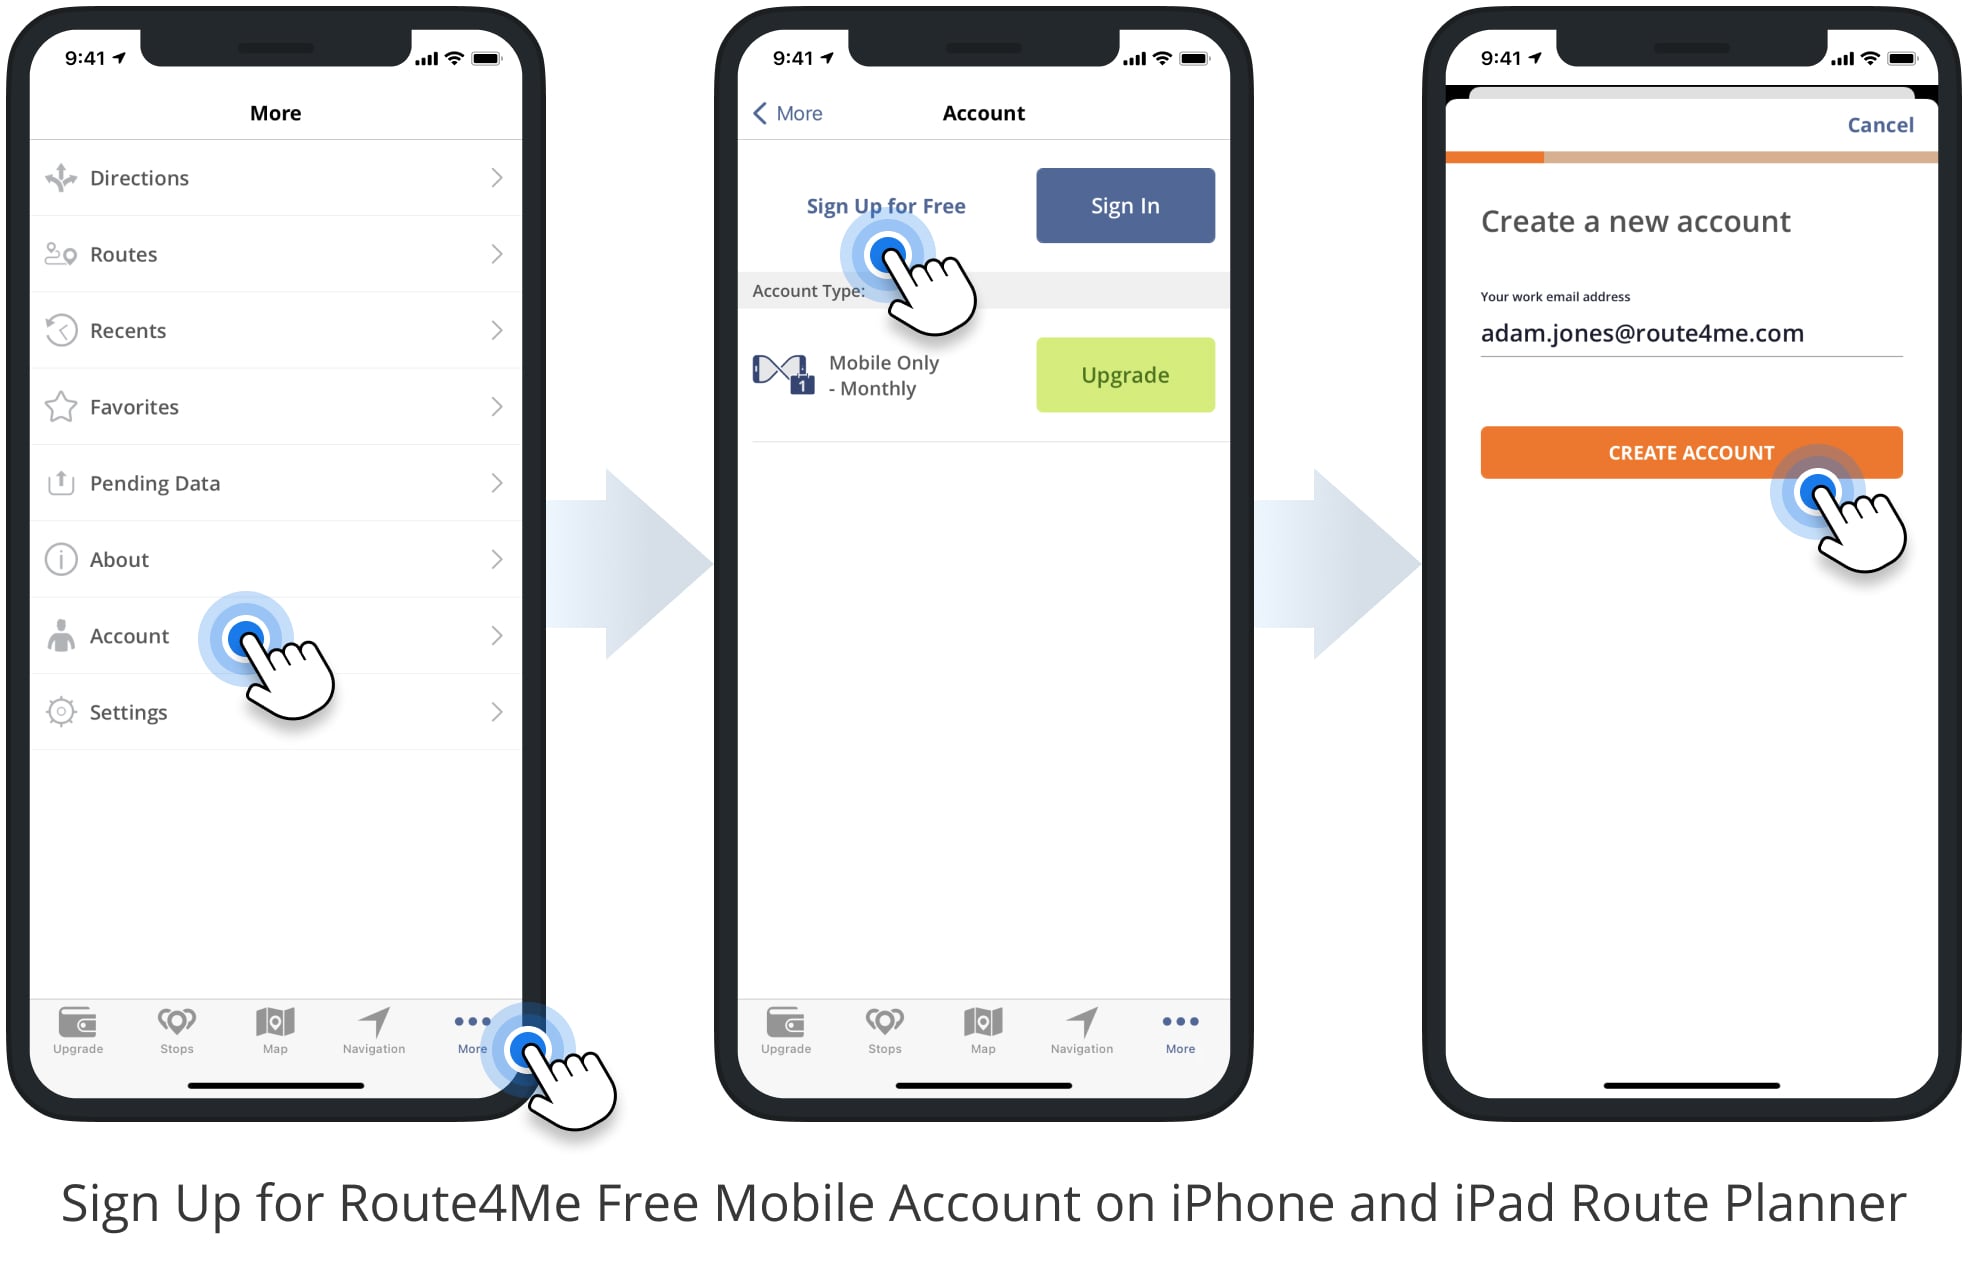 Complete the Route4Me Mobile Account sign up process to create a new route planner account.